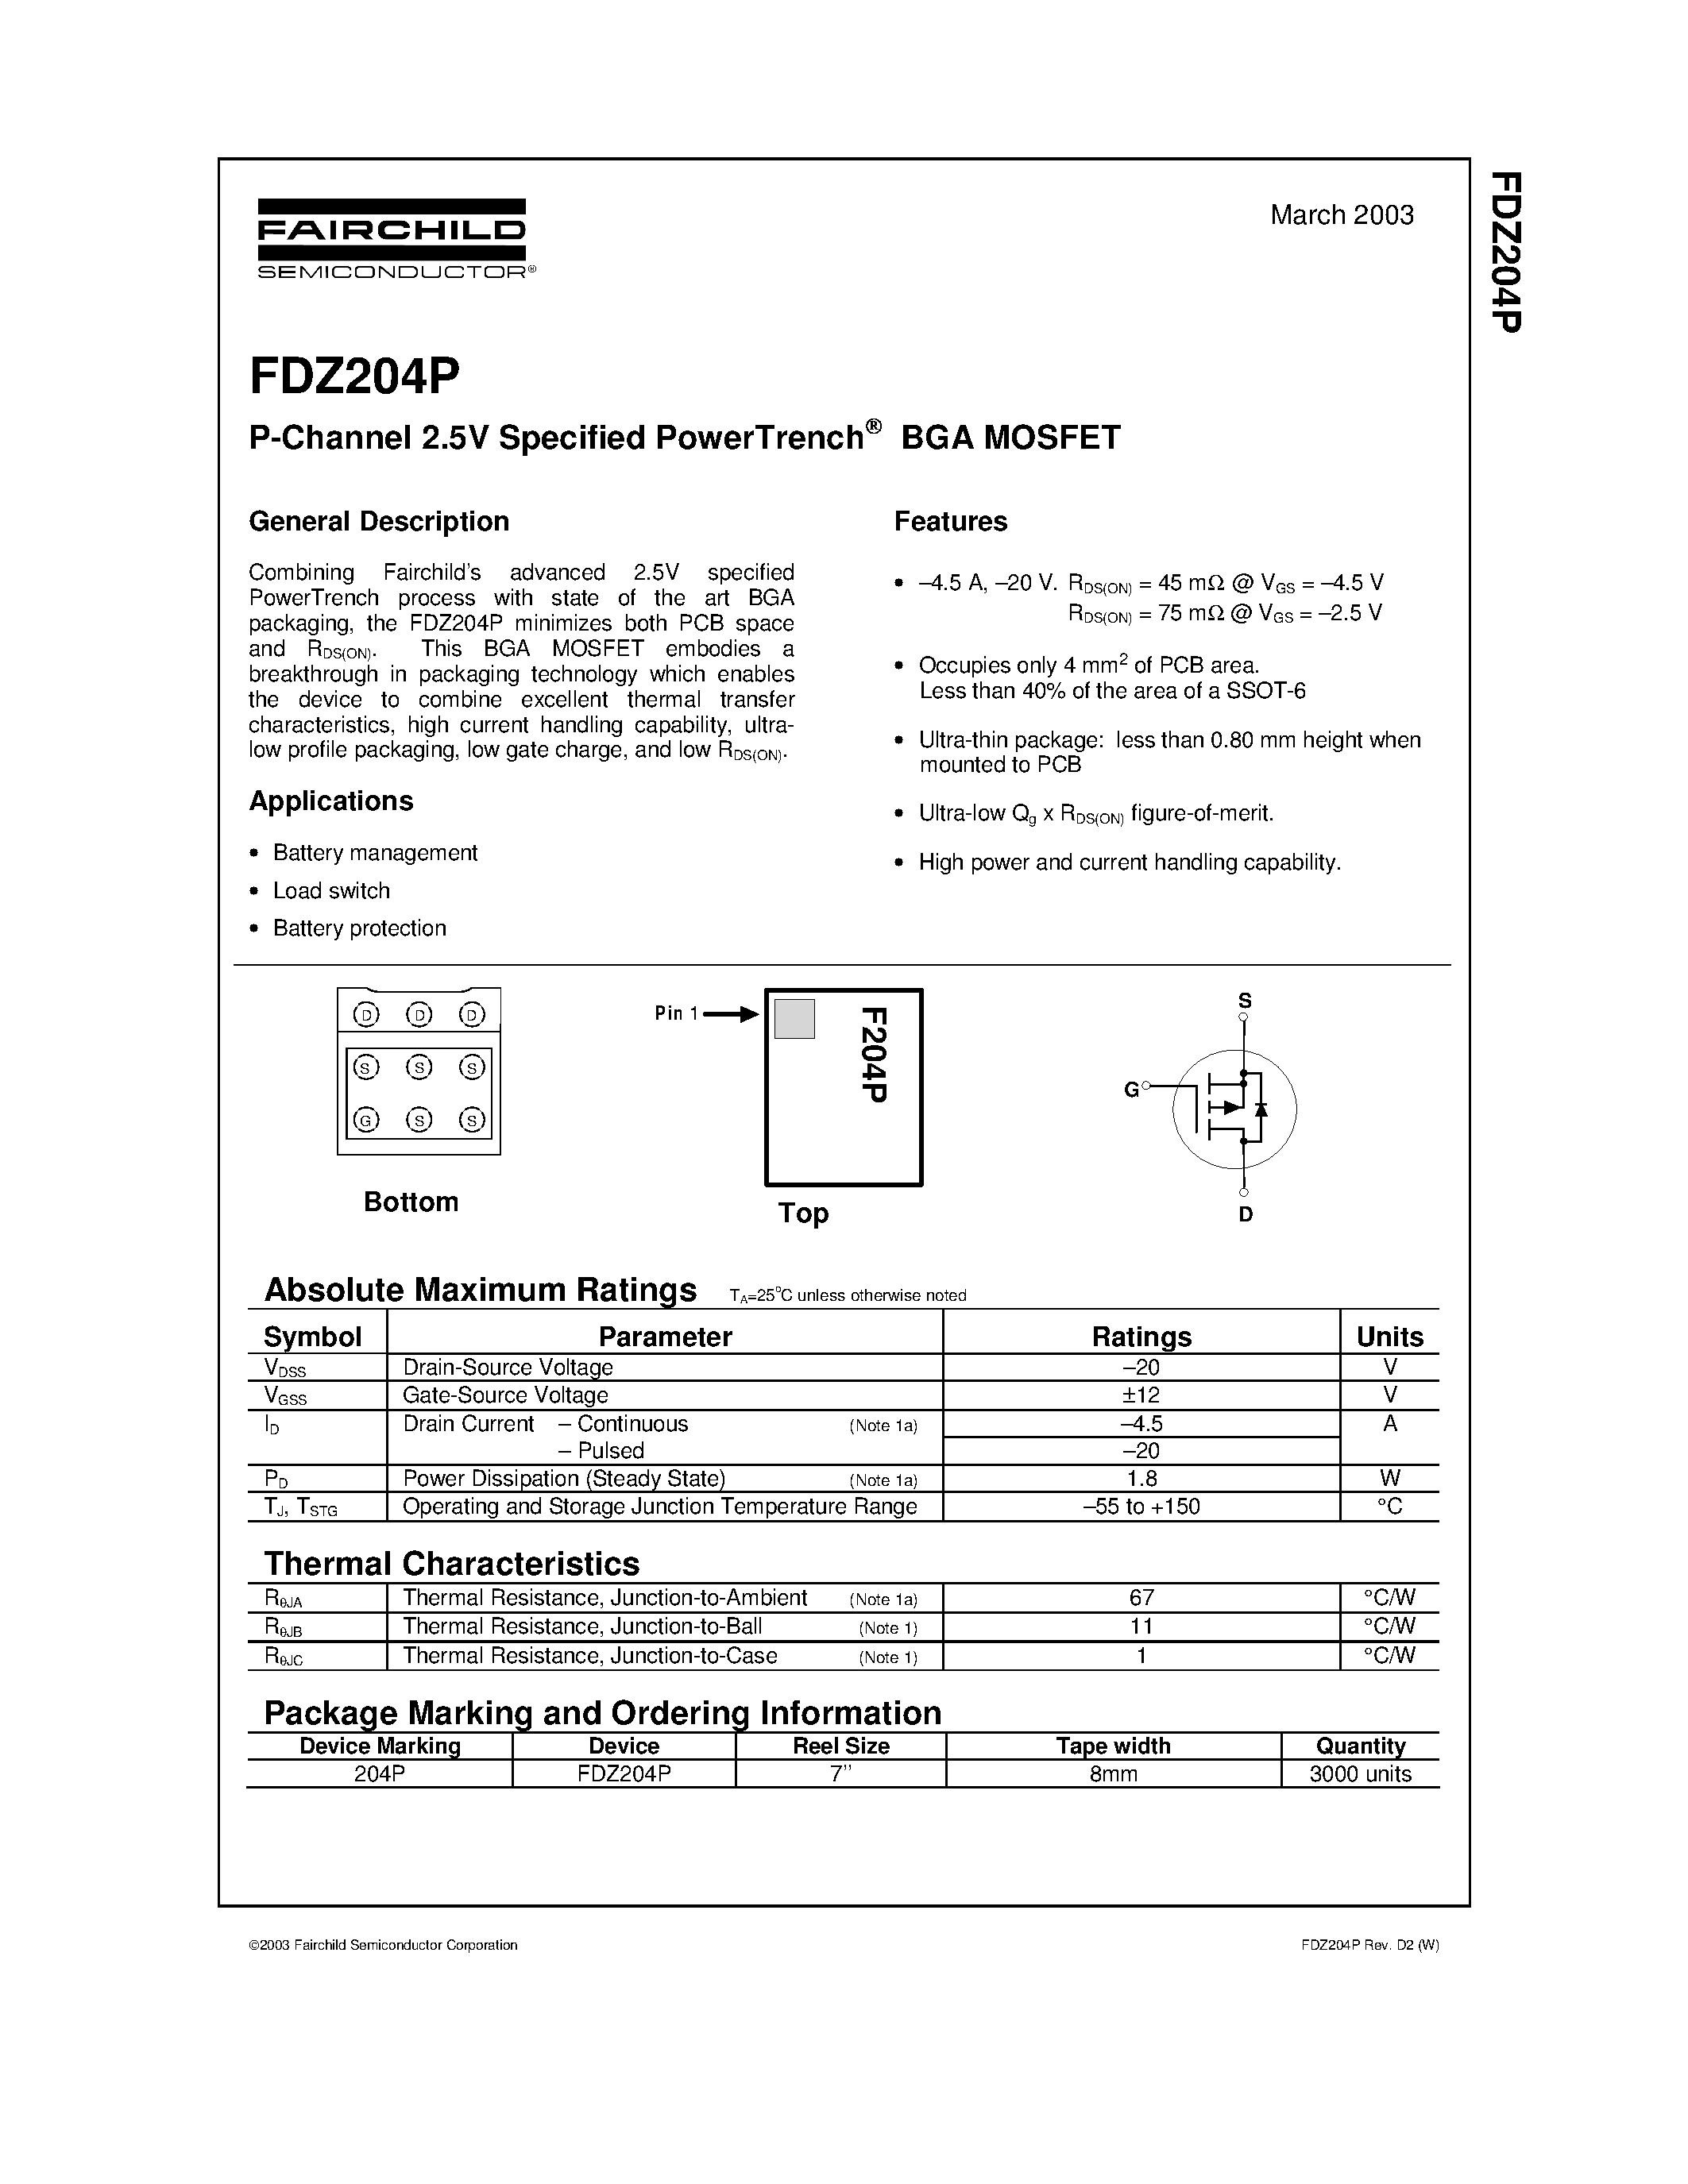 Даташит FDZ204P - P-Channel 2.5V Specified PowerTrench страница 1